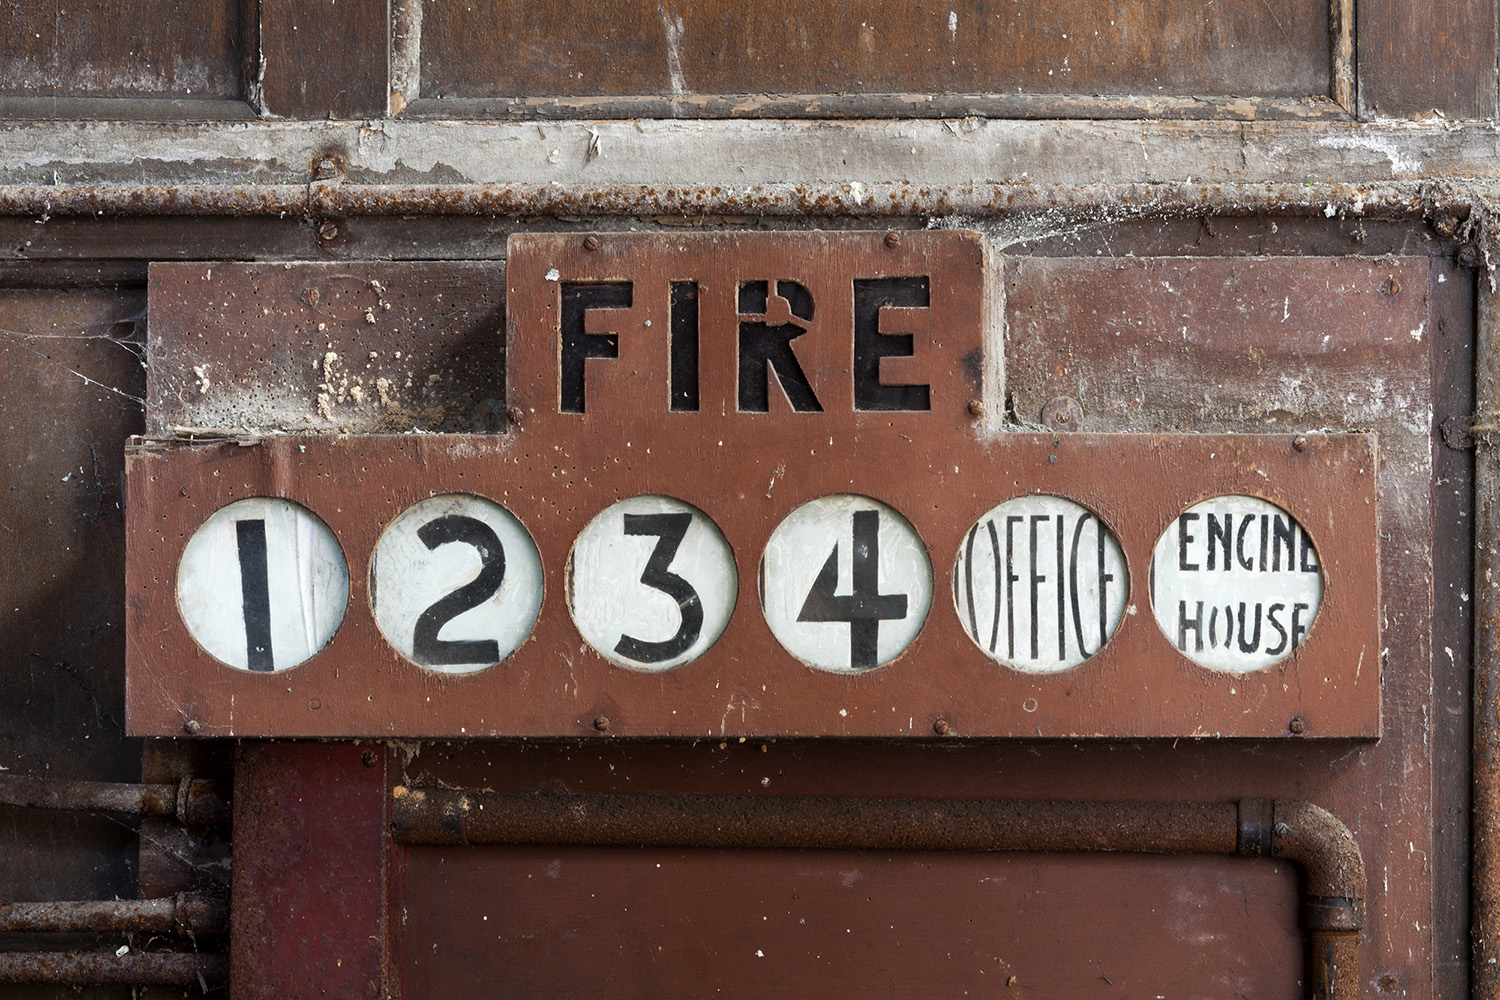 An old, red alarm panel attached to a wall. Underneath the word FIRE are indicators reading 1, 2, 3, 4, Office, Engine House.